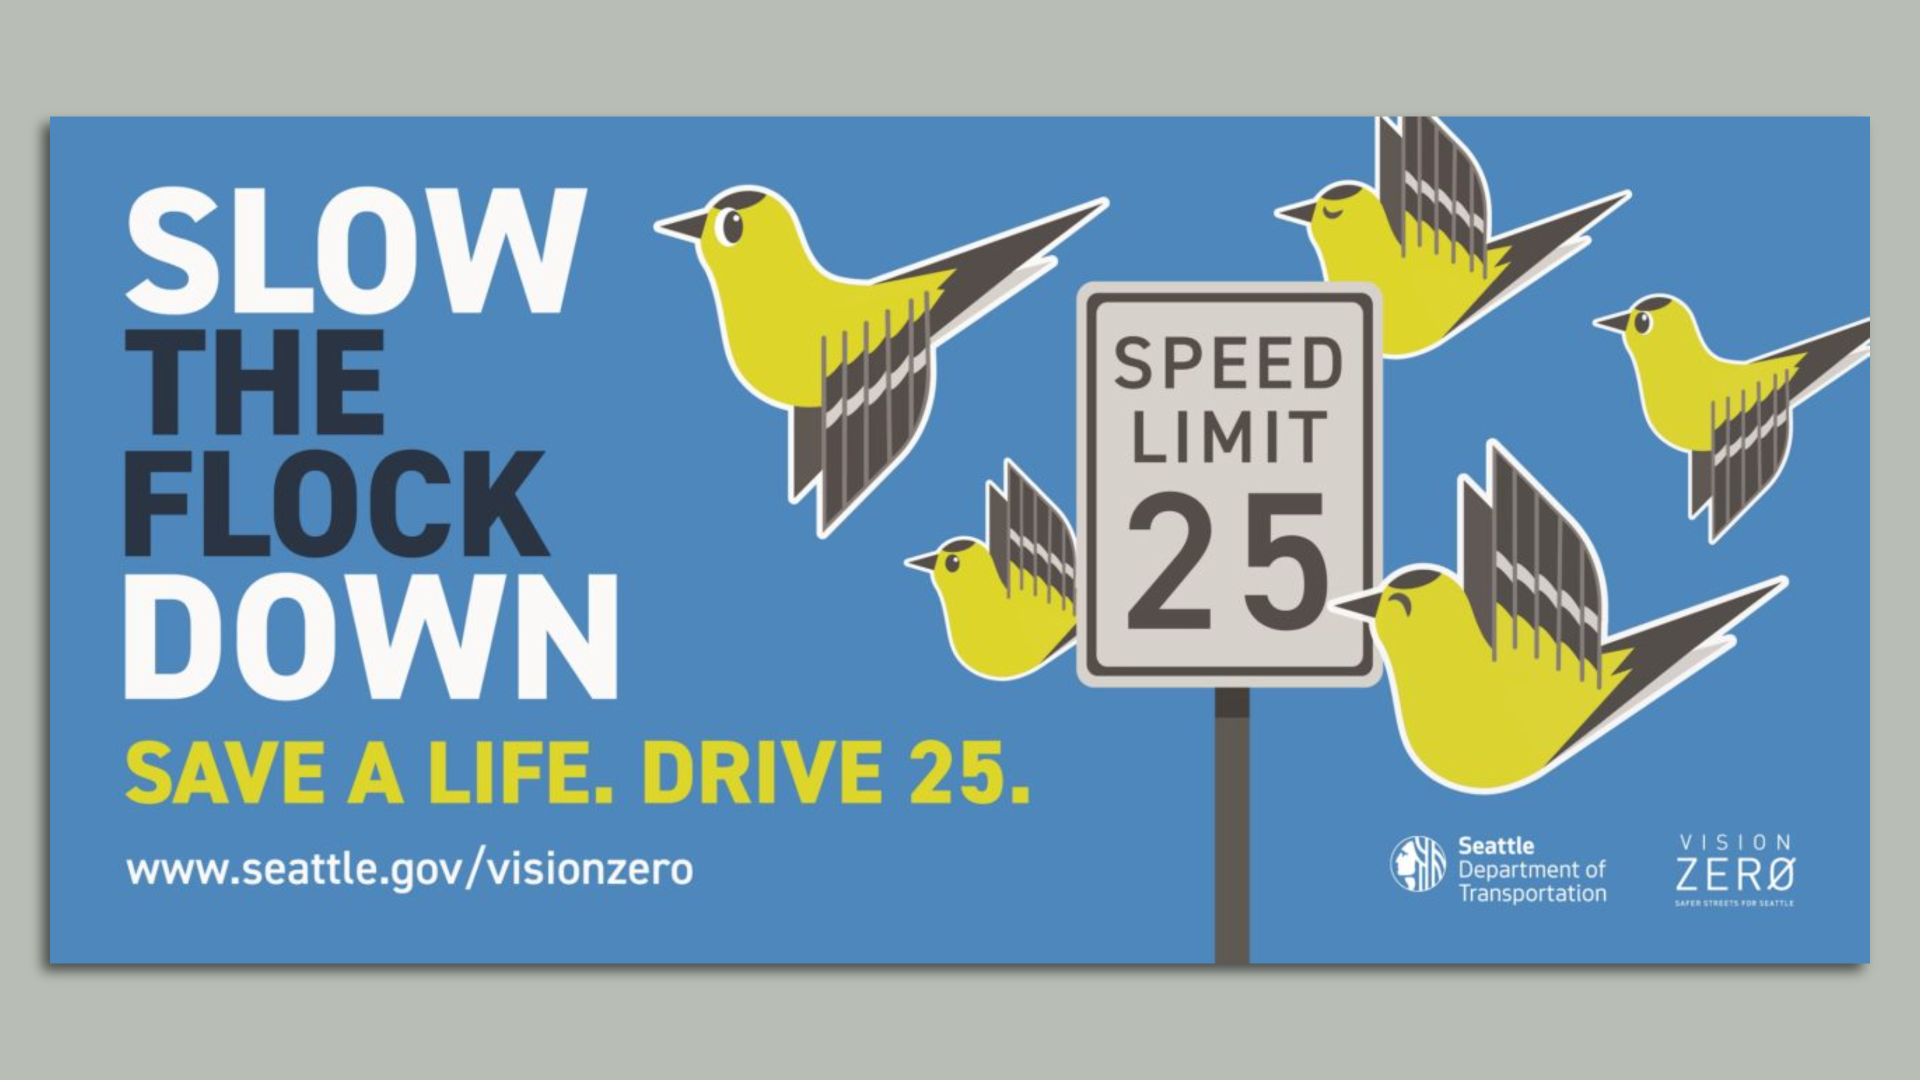 A blue graphic that says "Slow the flock down ... Save a life. Drive 25." With birds pictured.